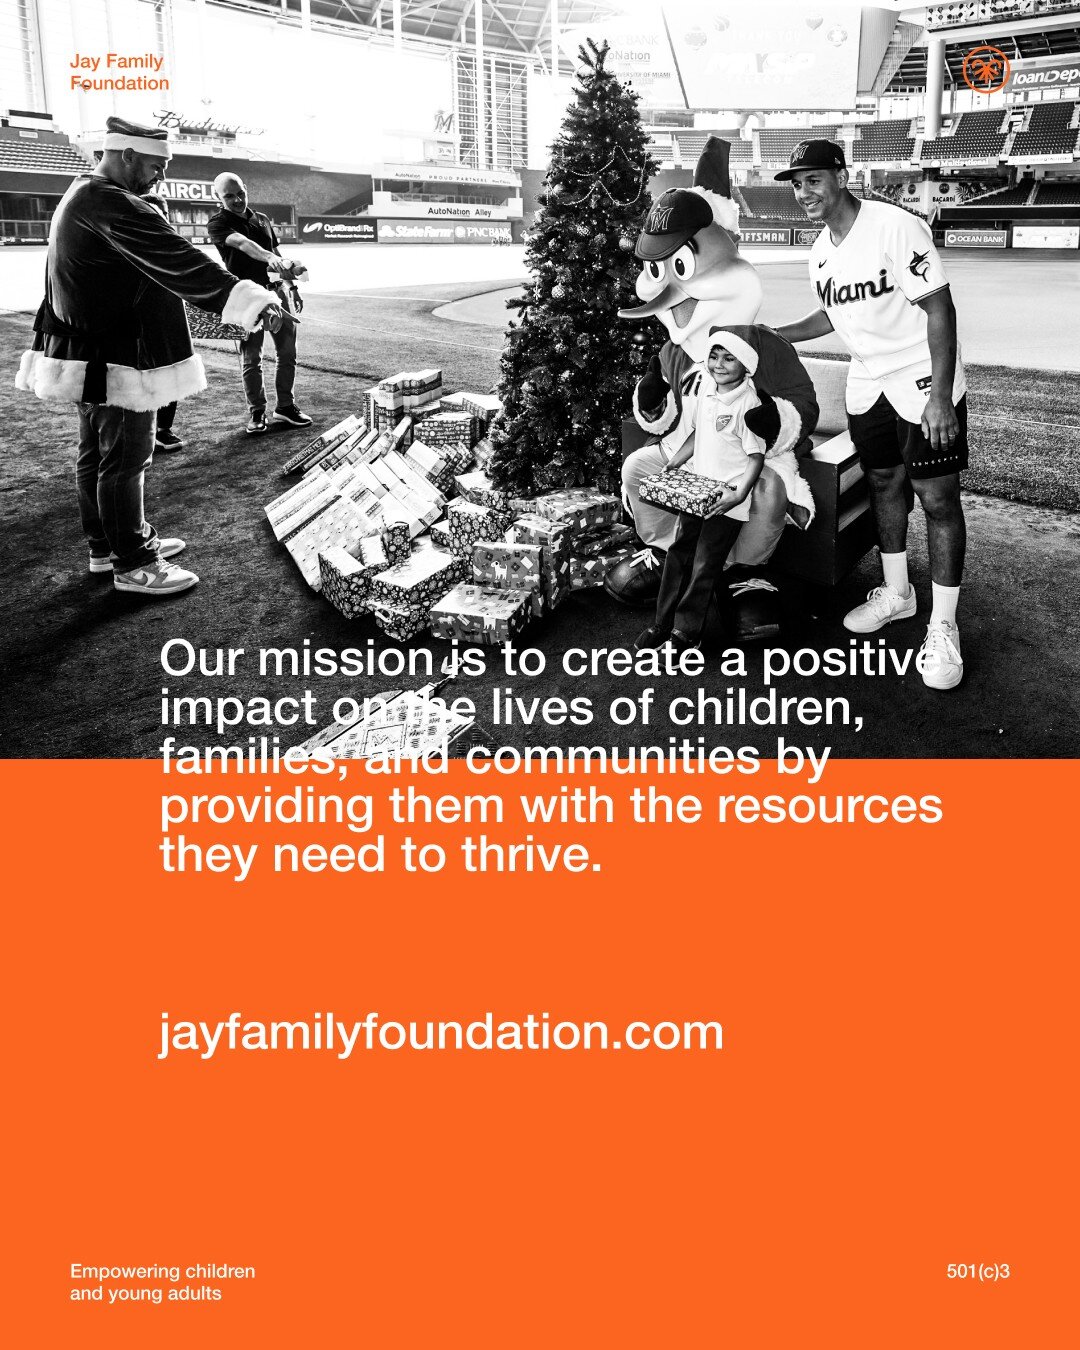 Our mission is to create a positive impact on the lives of children, families, and communities by providing them with the resources they need to thrive. 
 
See more at jayfamilyfoundation.com